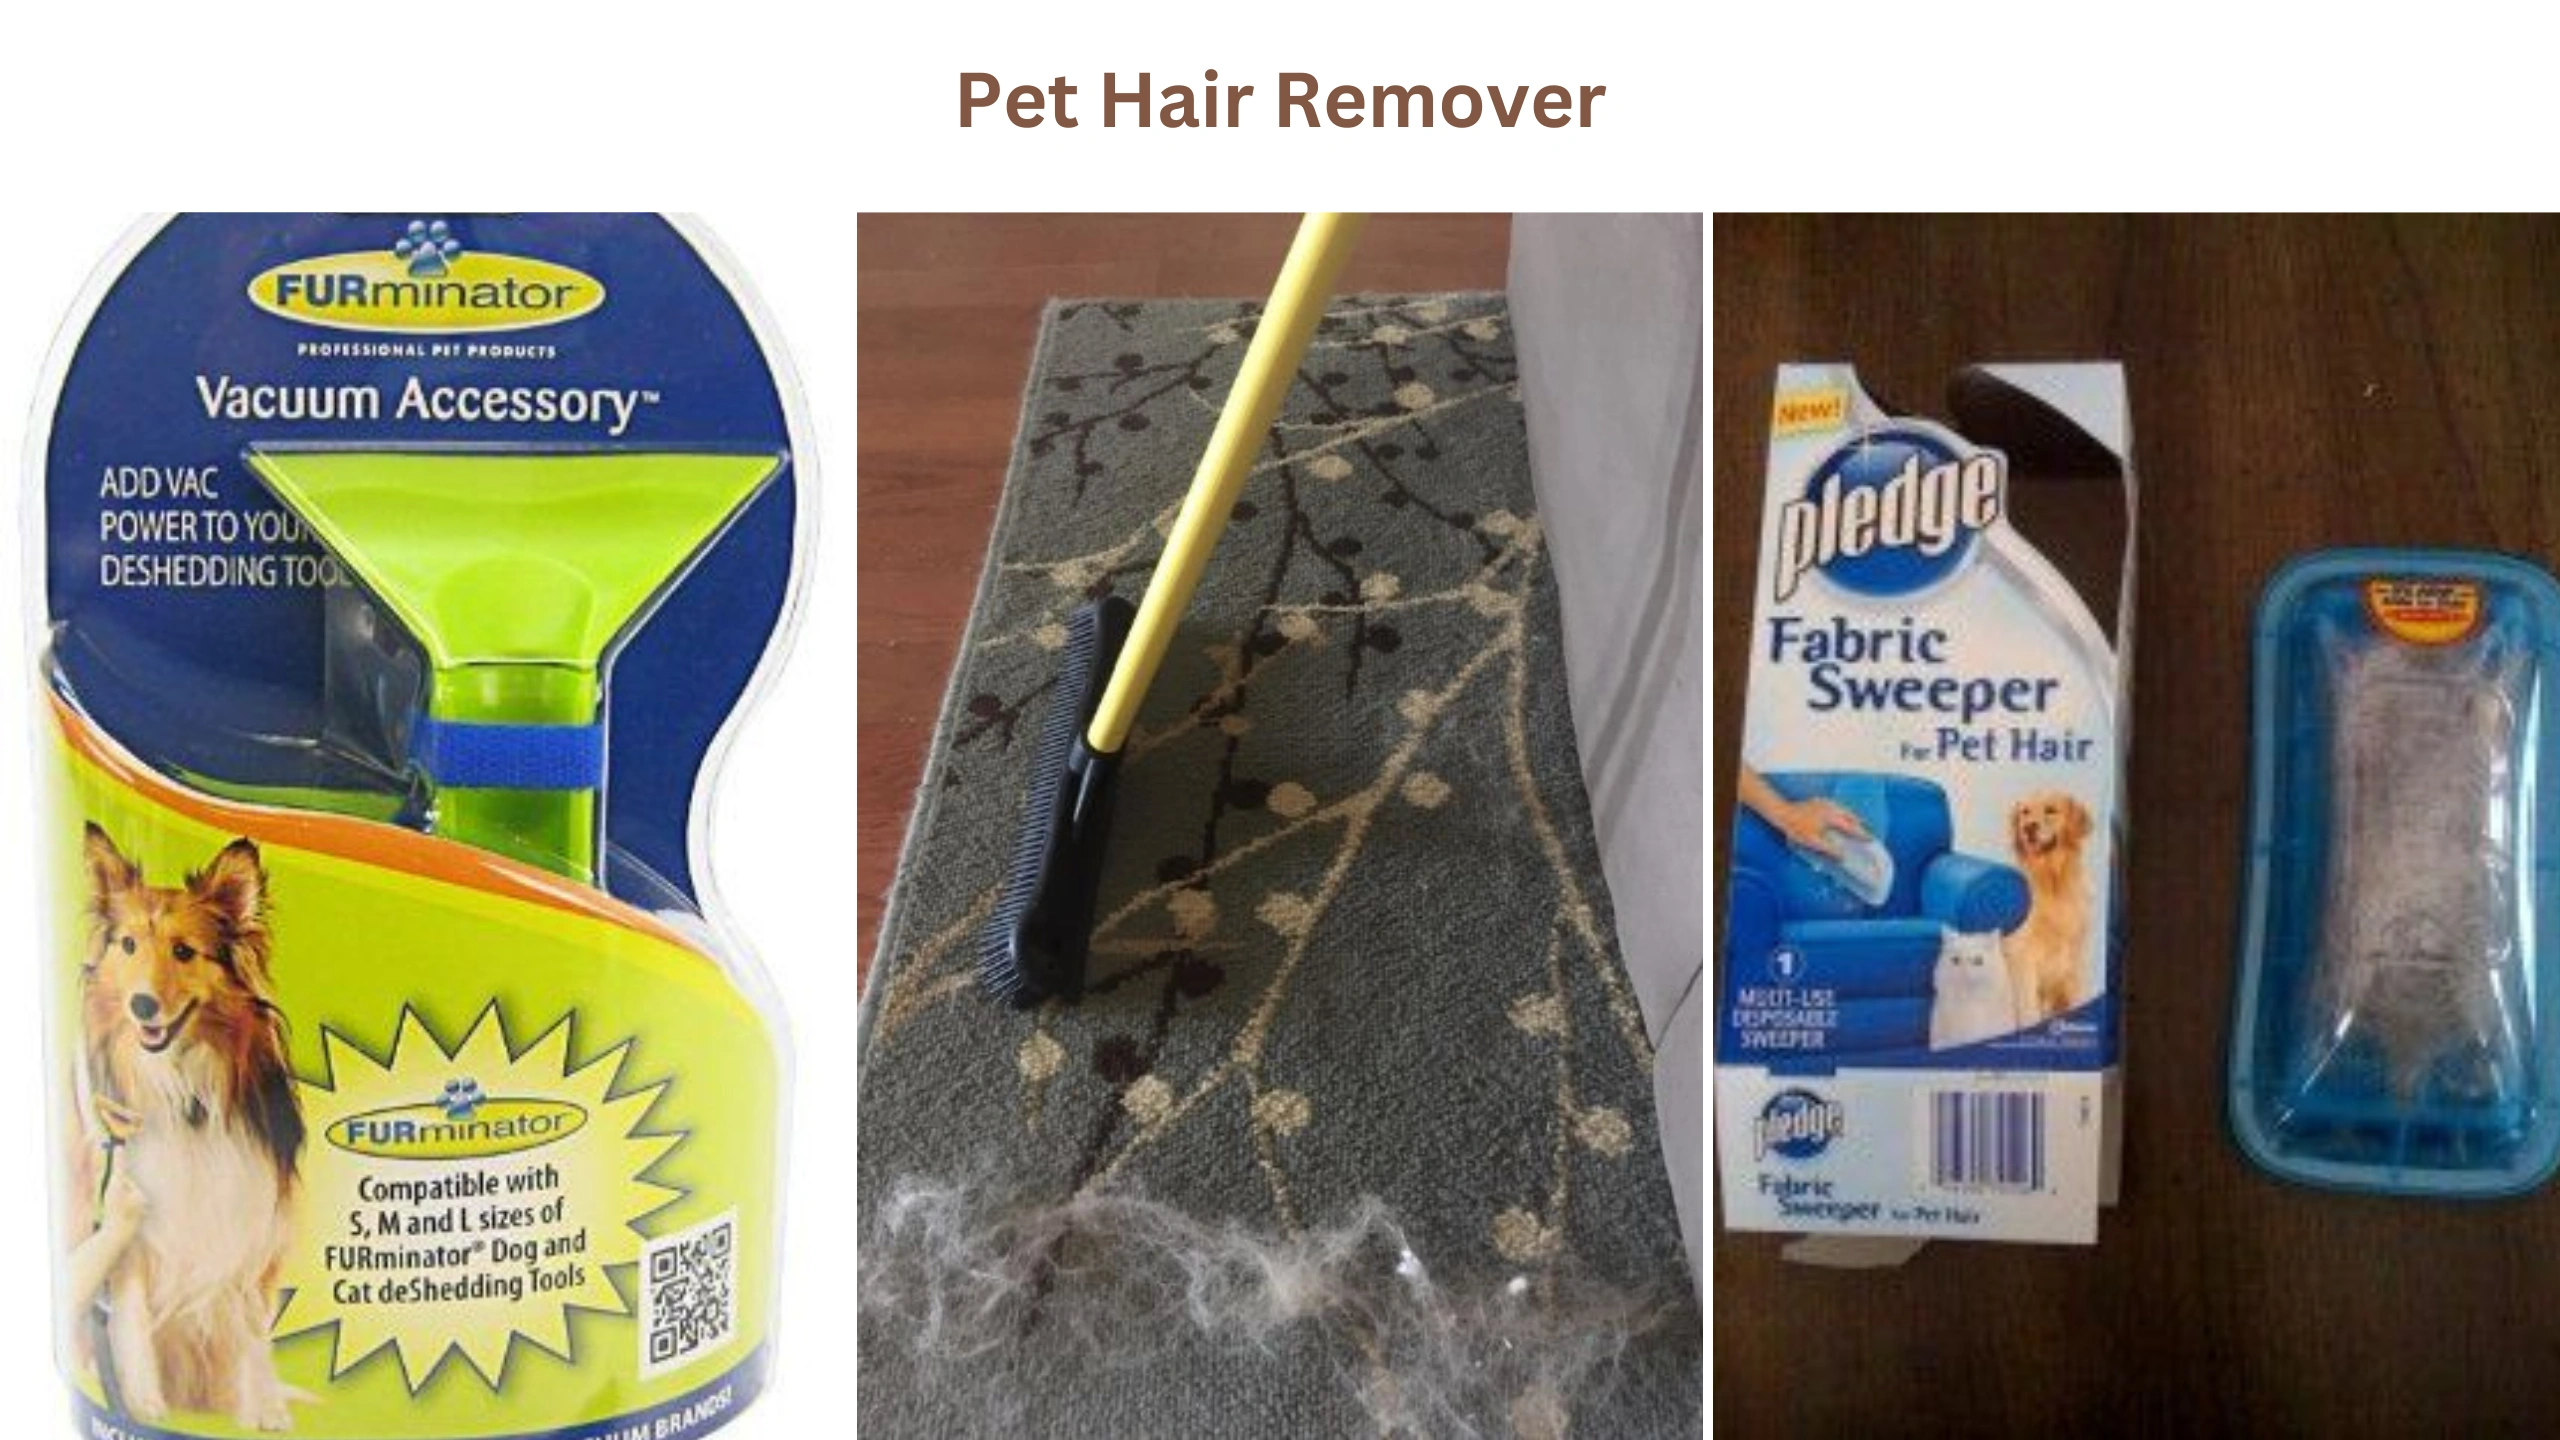 Pet hair removers